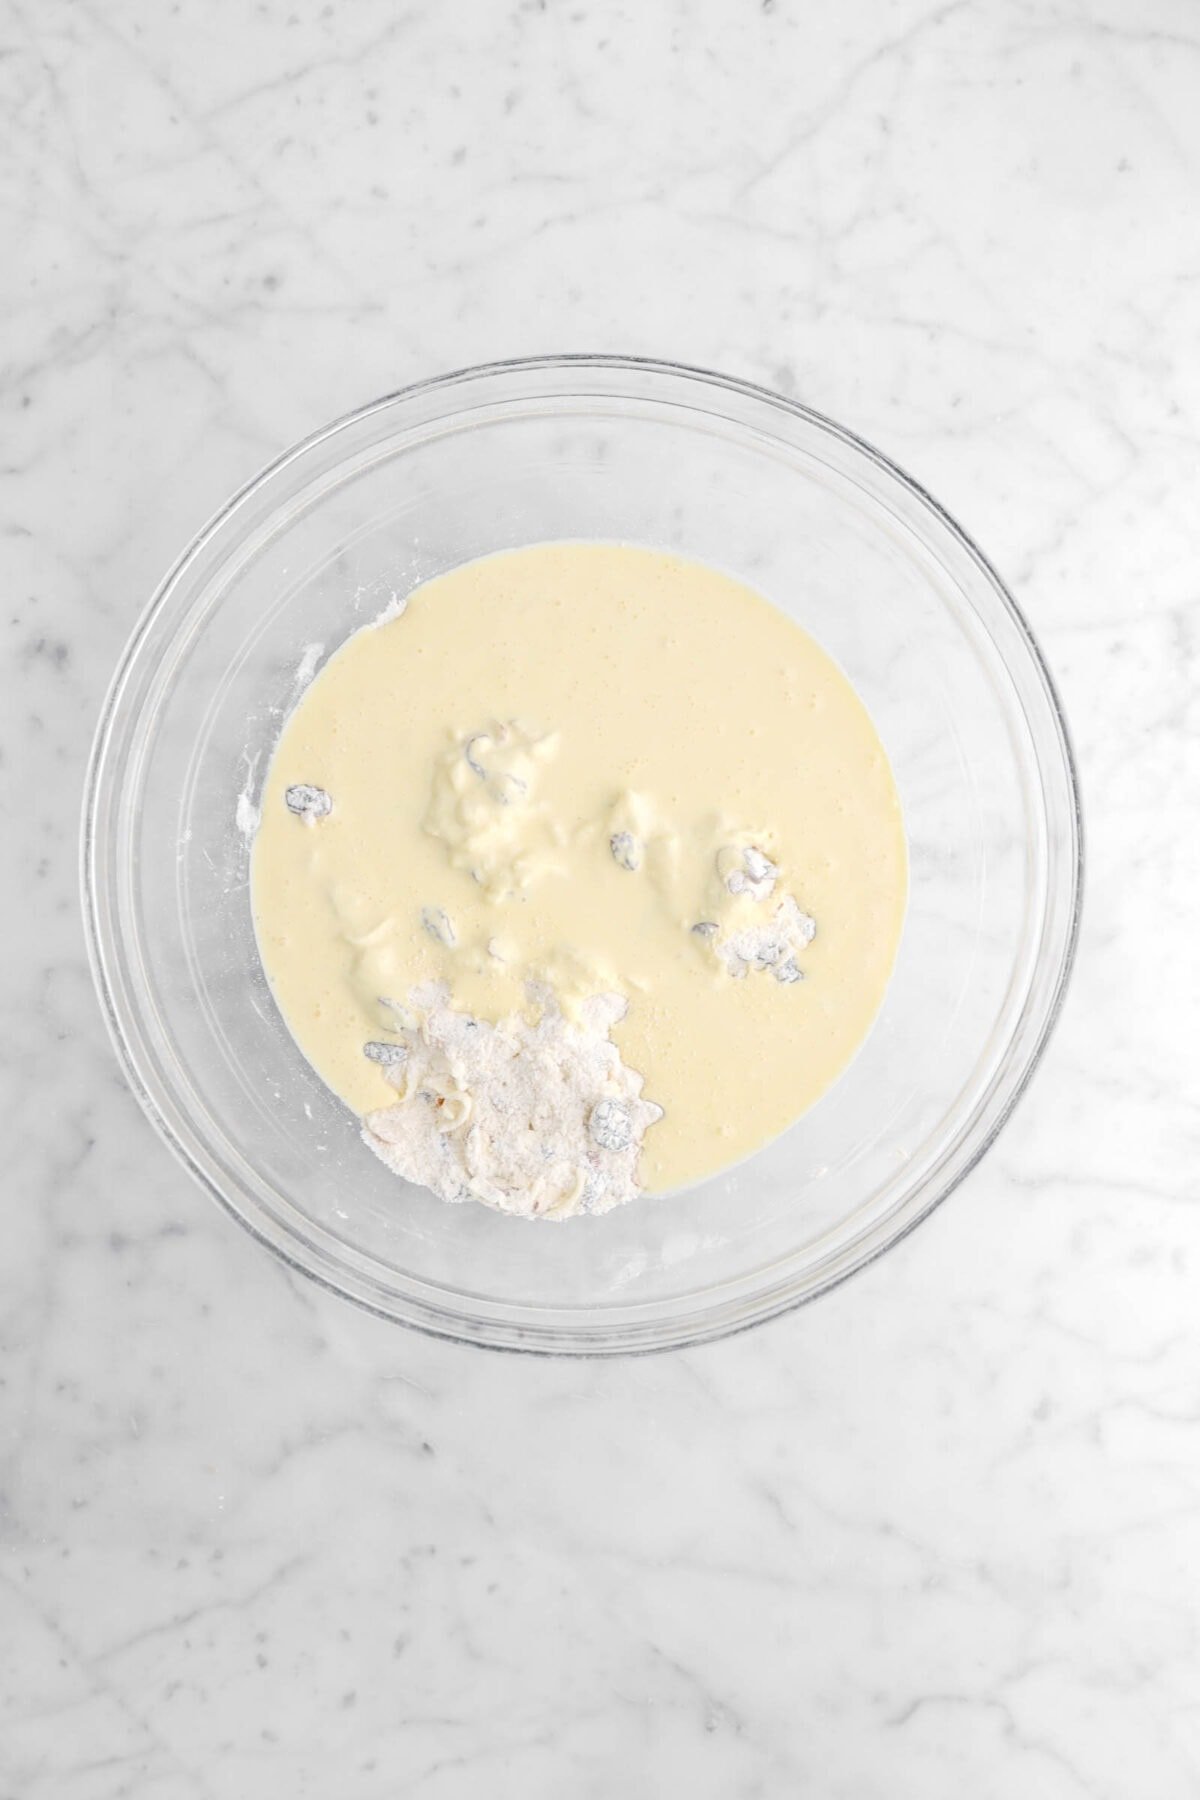 cream mixture added to dry ingredients.